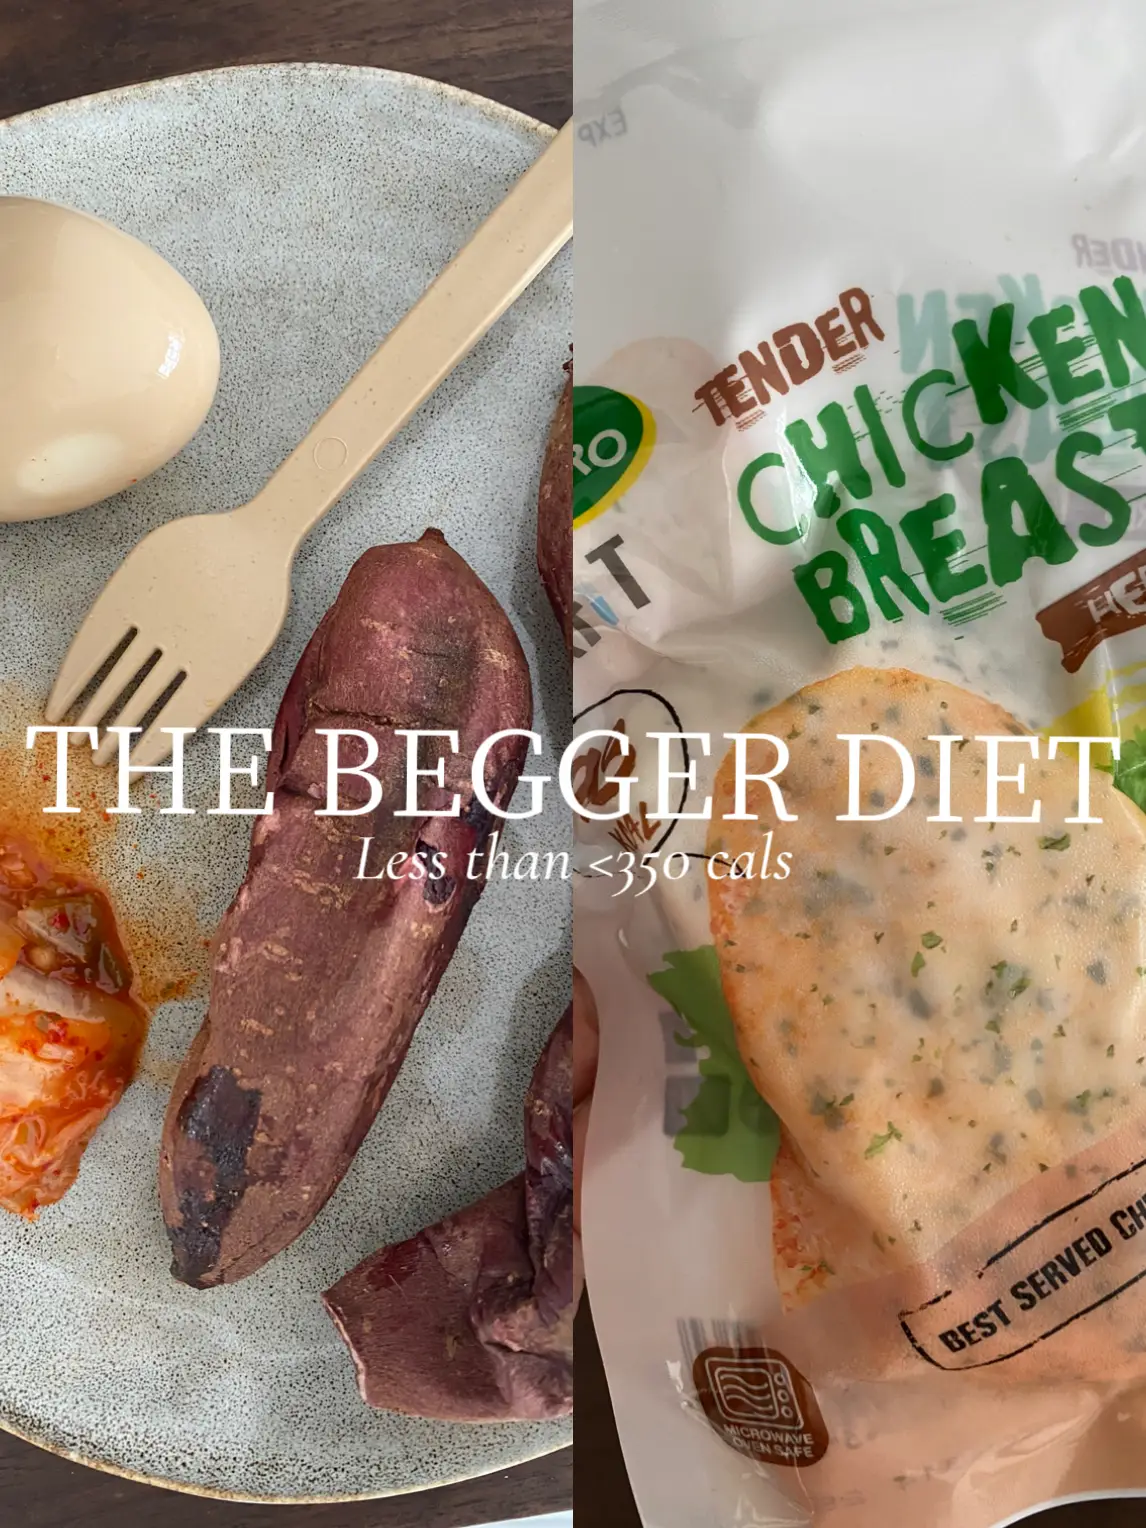 <350CALS: THE BEGGER DIET 's images(0)